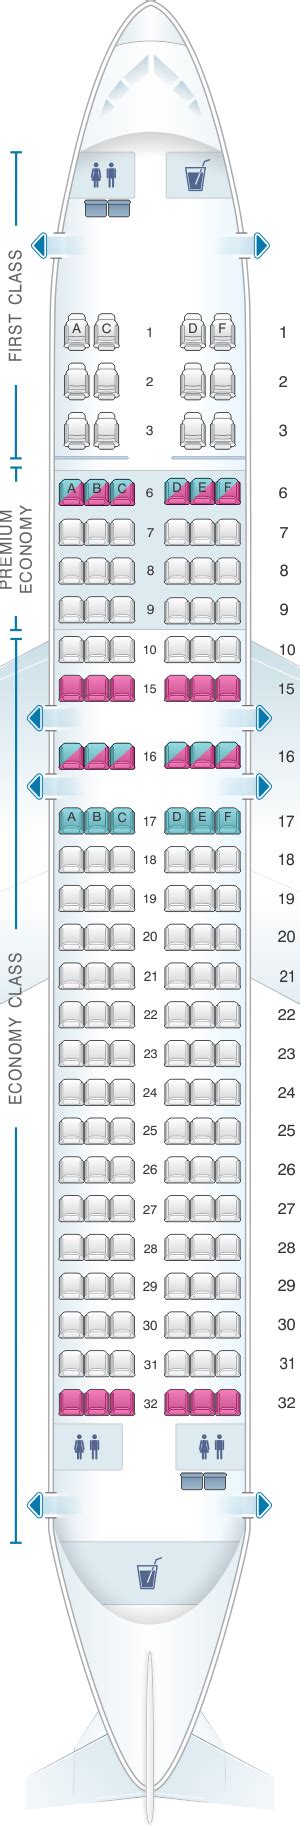 Delta Airbus A320 Seat Map